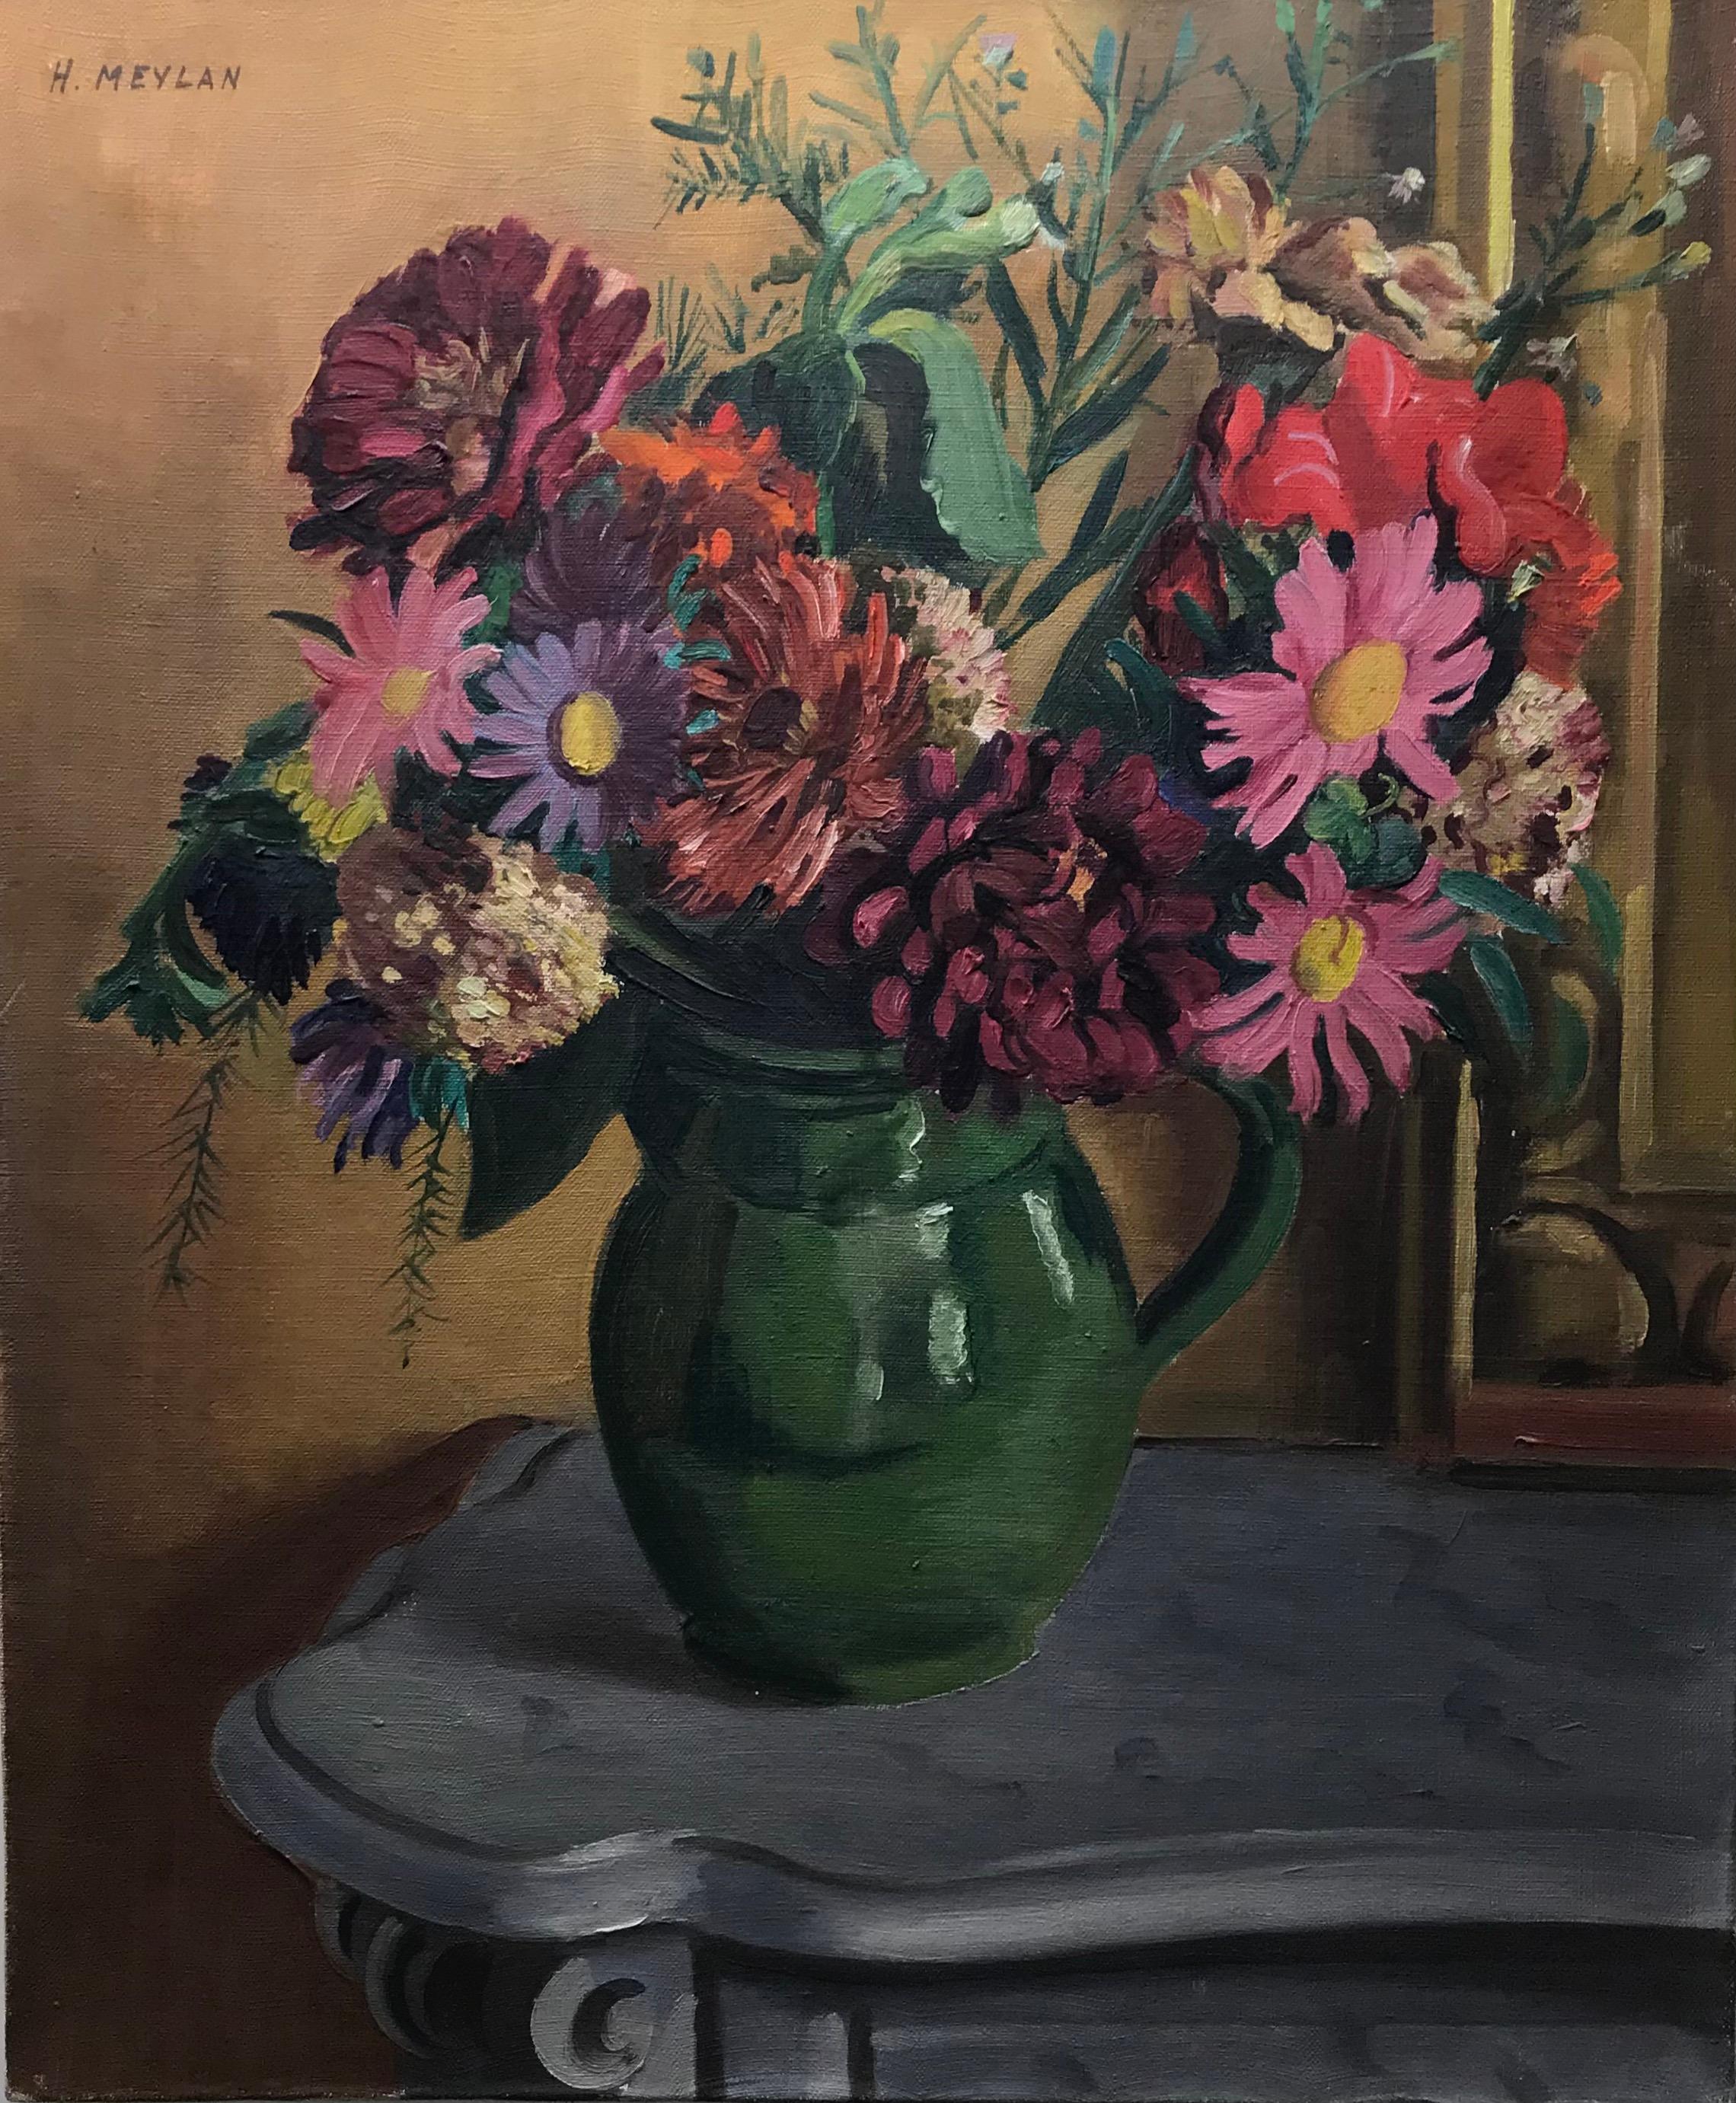 Bouquet by Henry Meylan - Oil on canvas